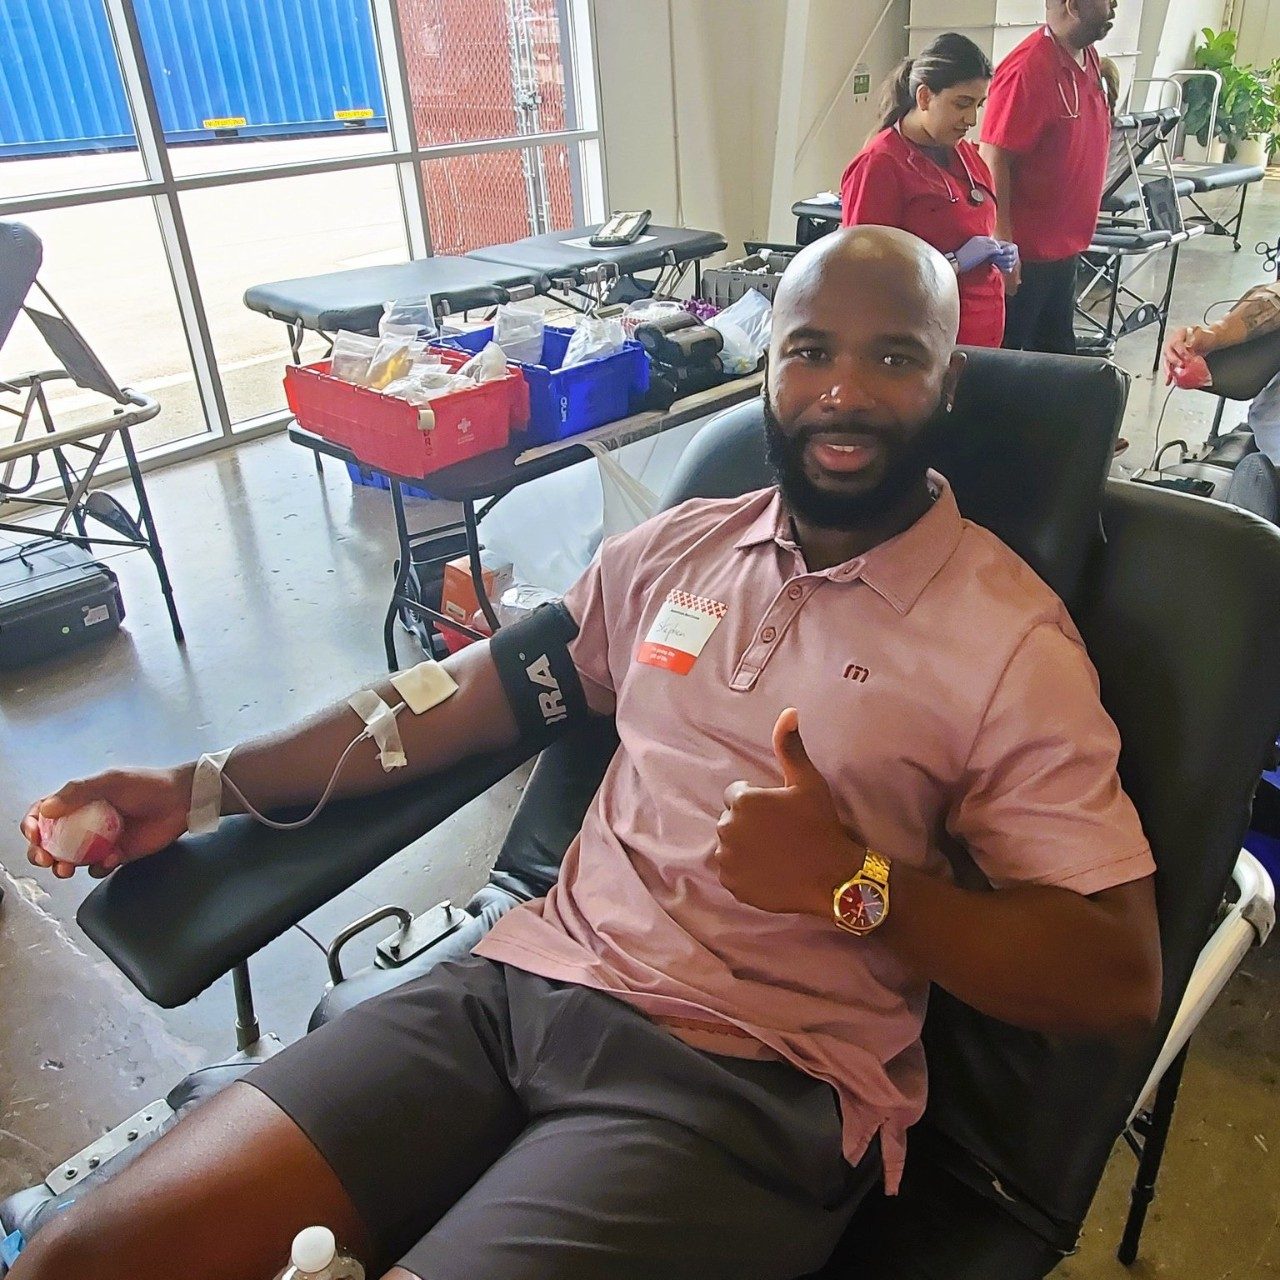 One Individual donating blood